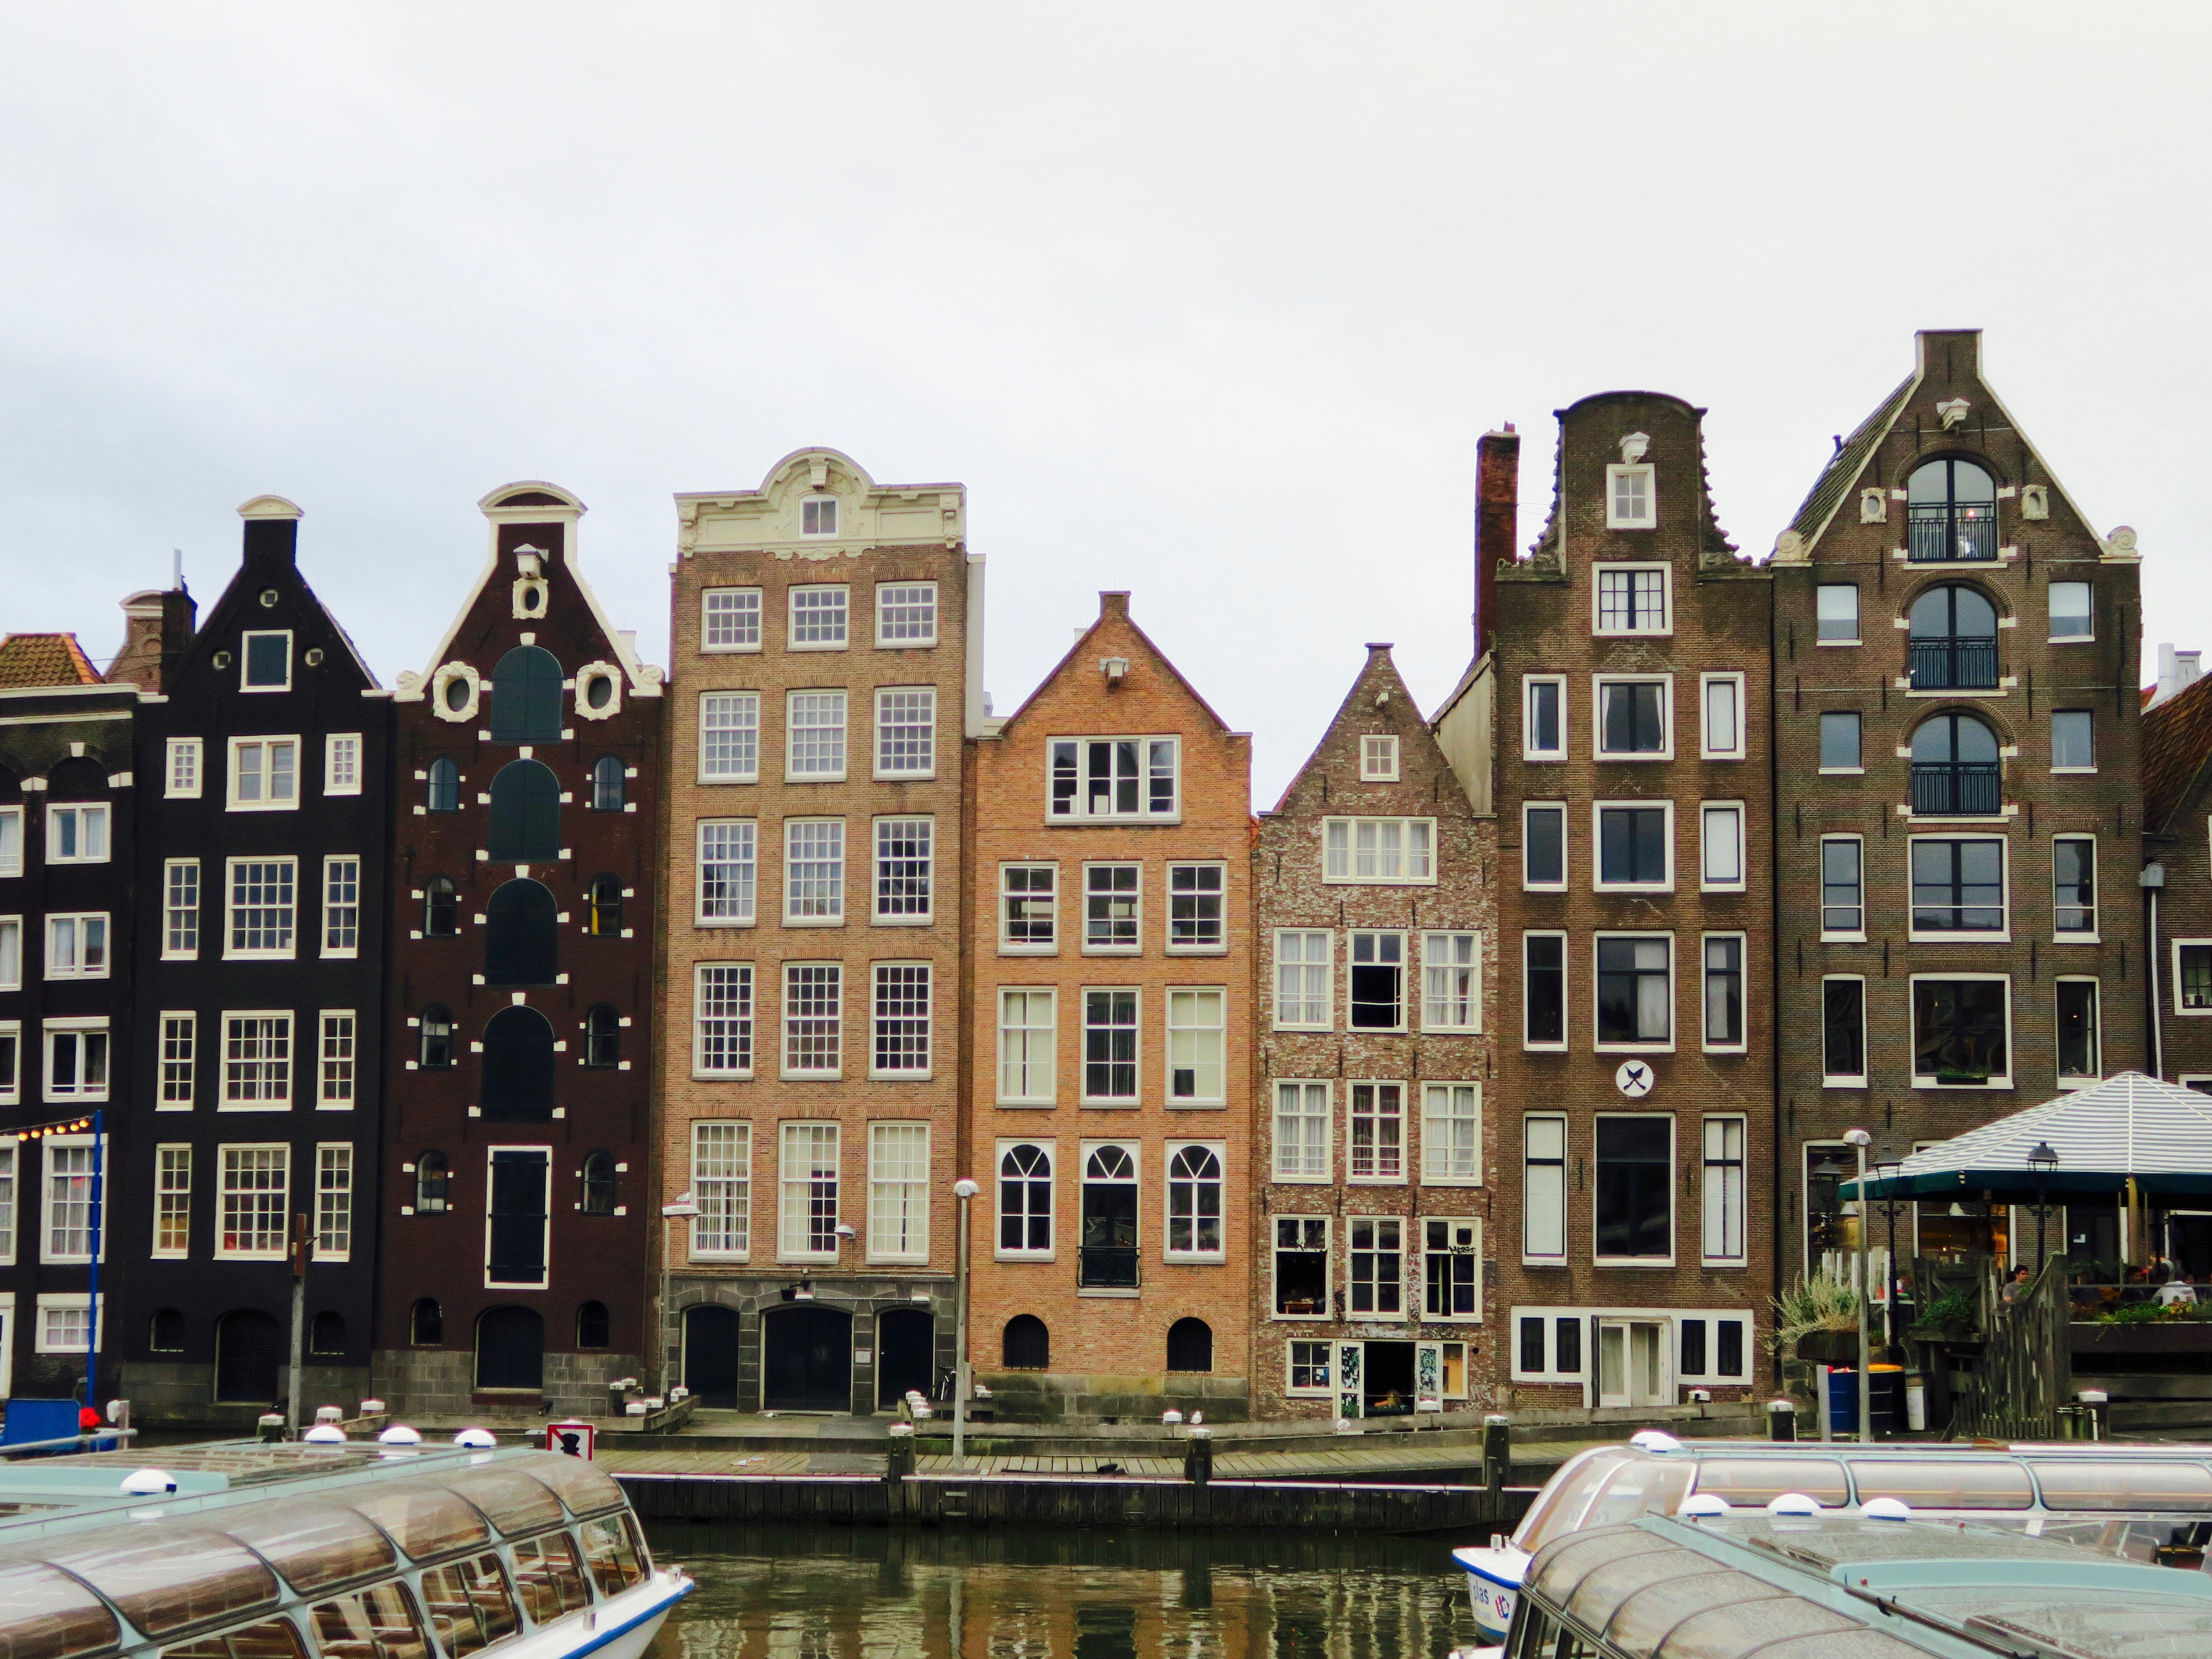 1 Dutch houses in Amsterdam - Curiously Conscious